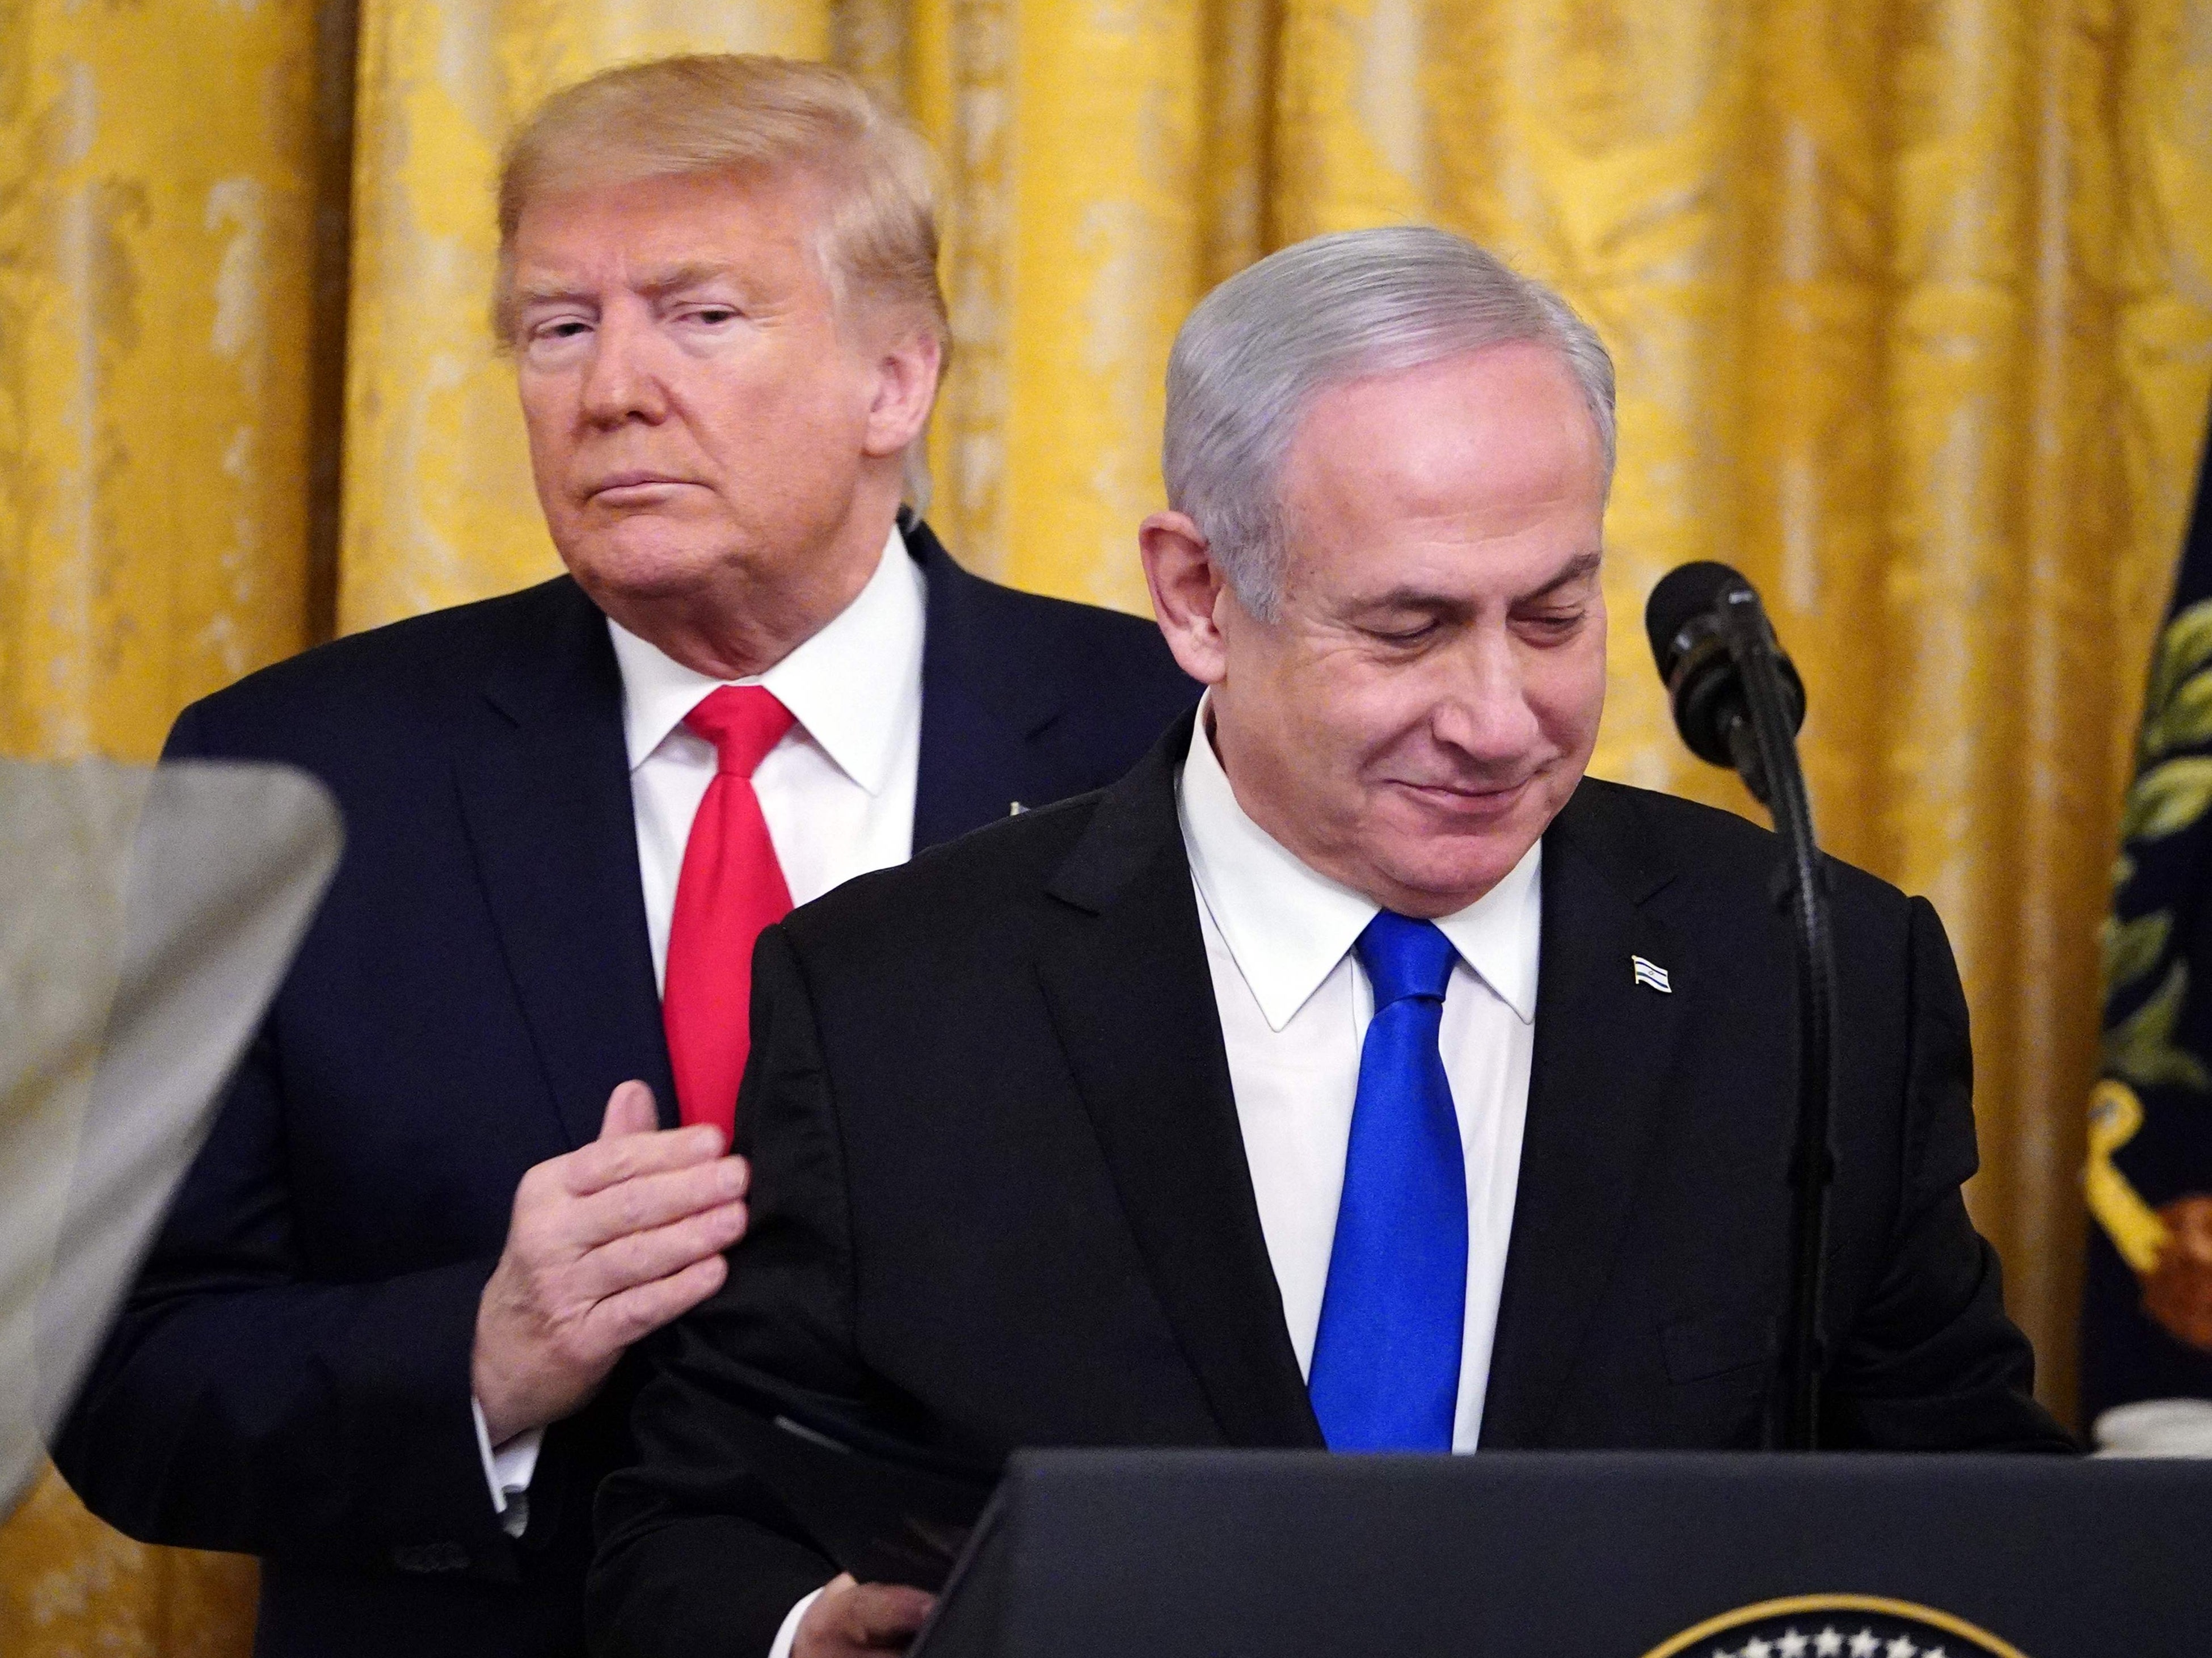 Donald Trump and Benjamin Netanyahu at the announcement of the Middle East peace plan in January